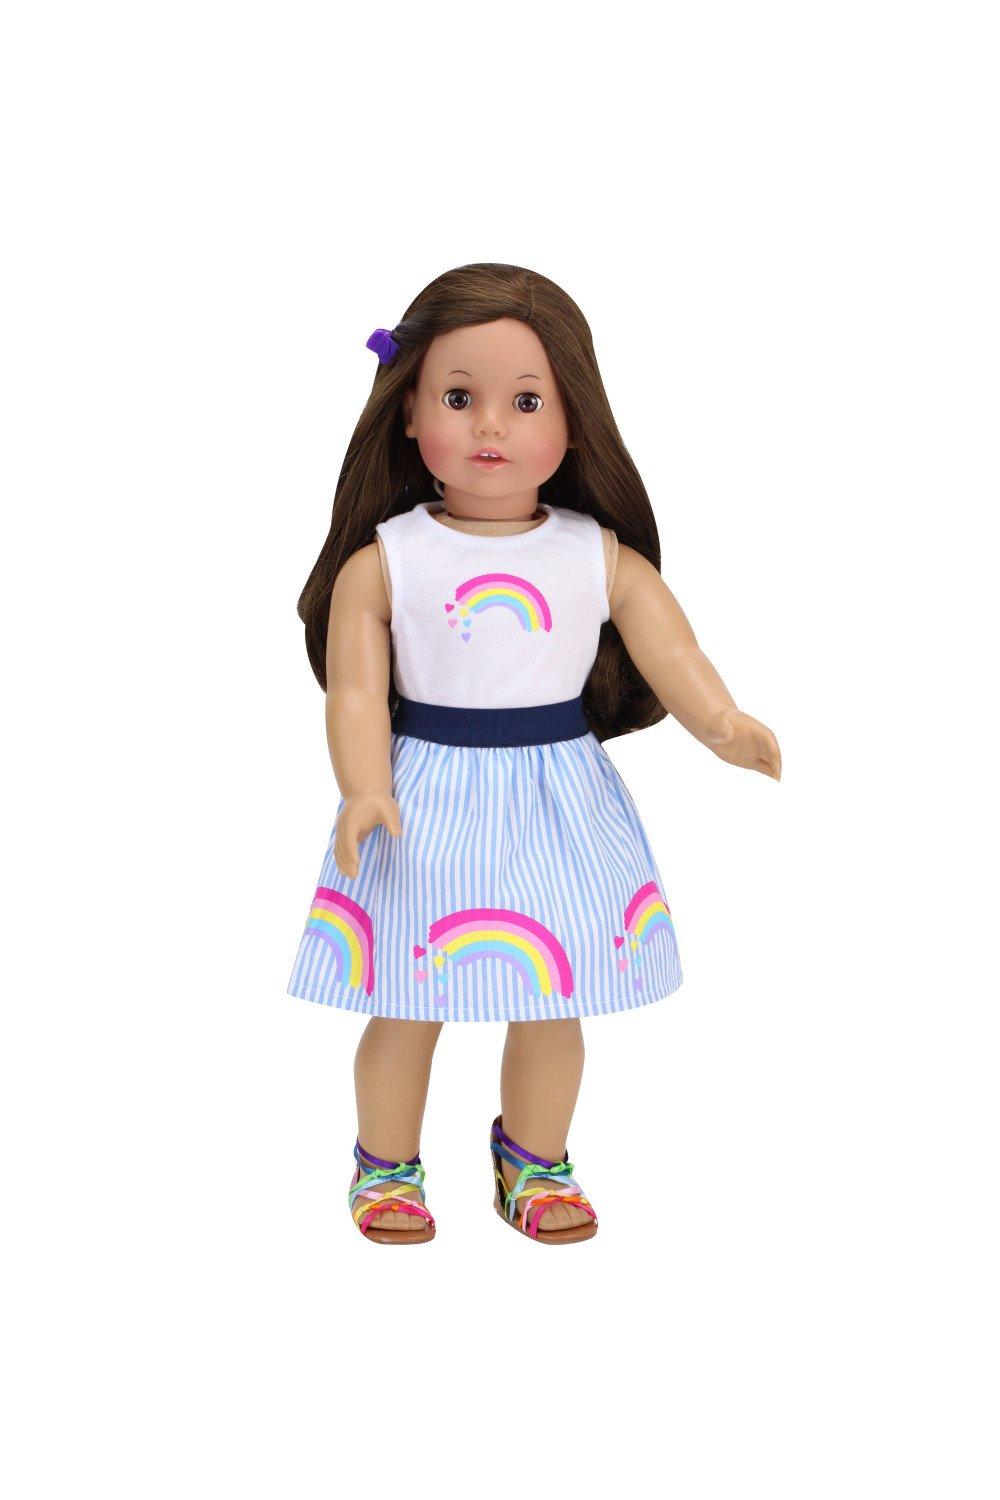 Sophia’s 2 Piece 18" Baby Doll Rainbow Top & Skirt Outfit